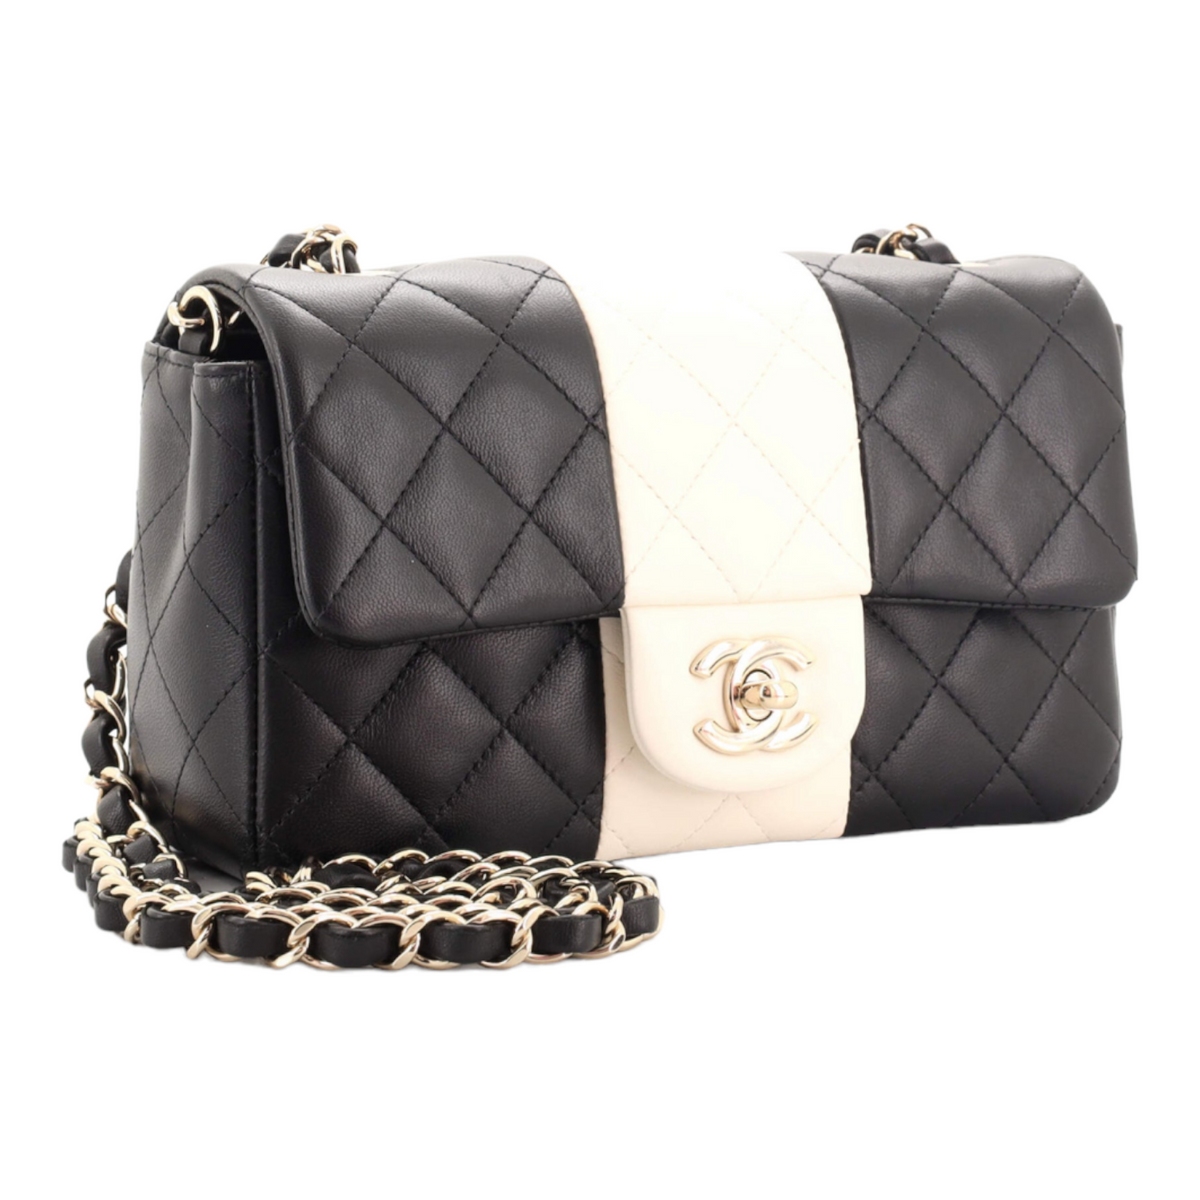 Chanel Timeless Black & White Small Flap